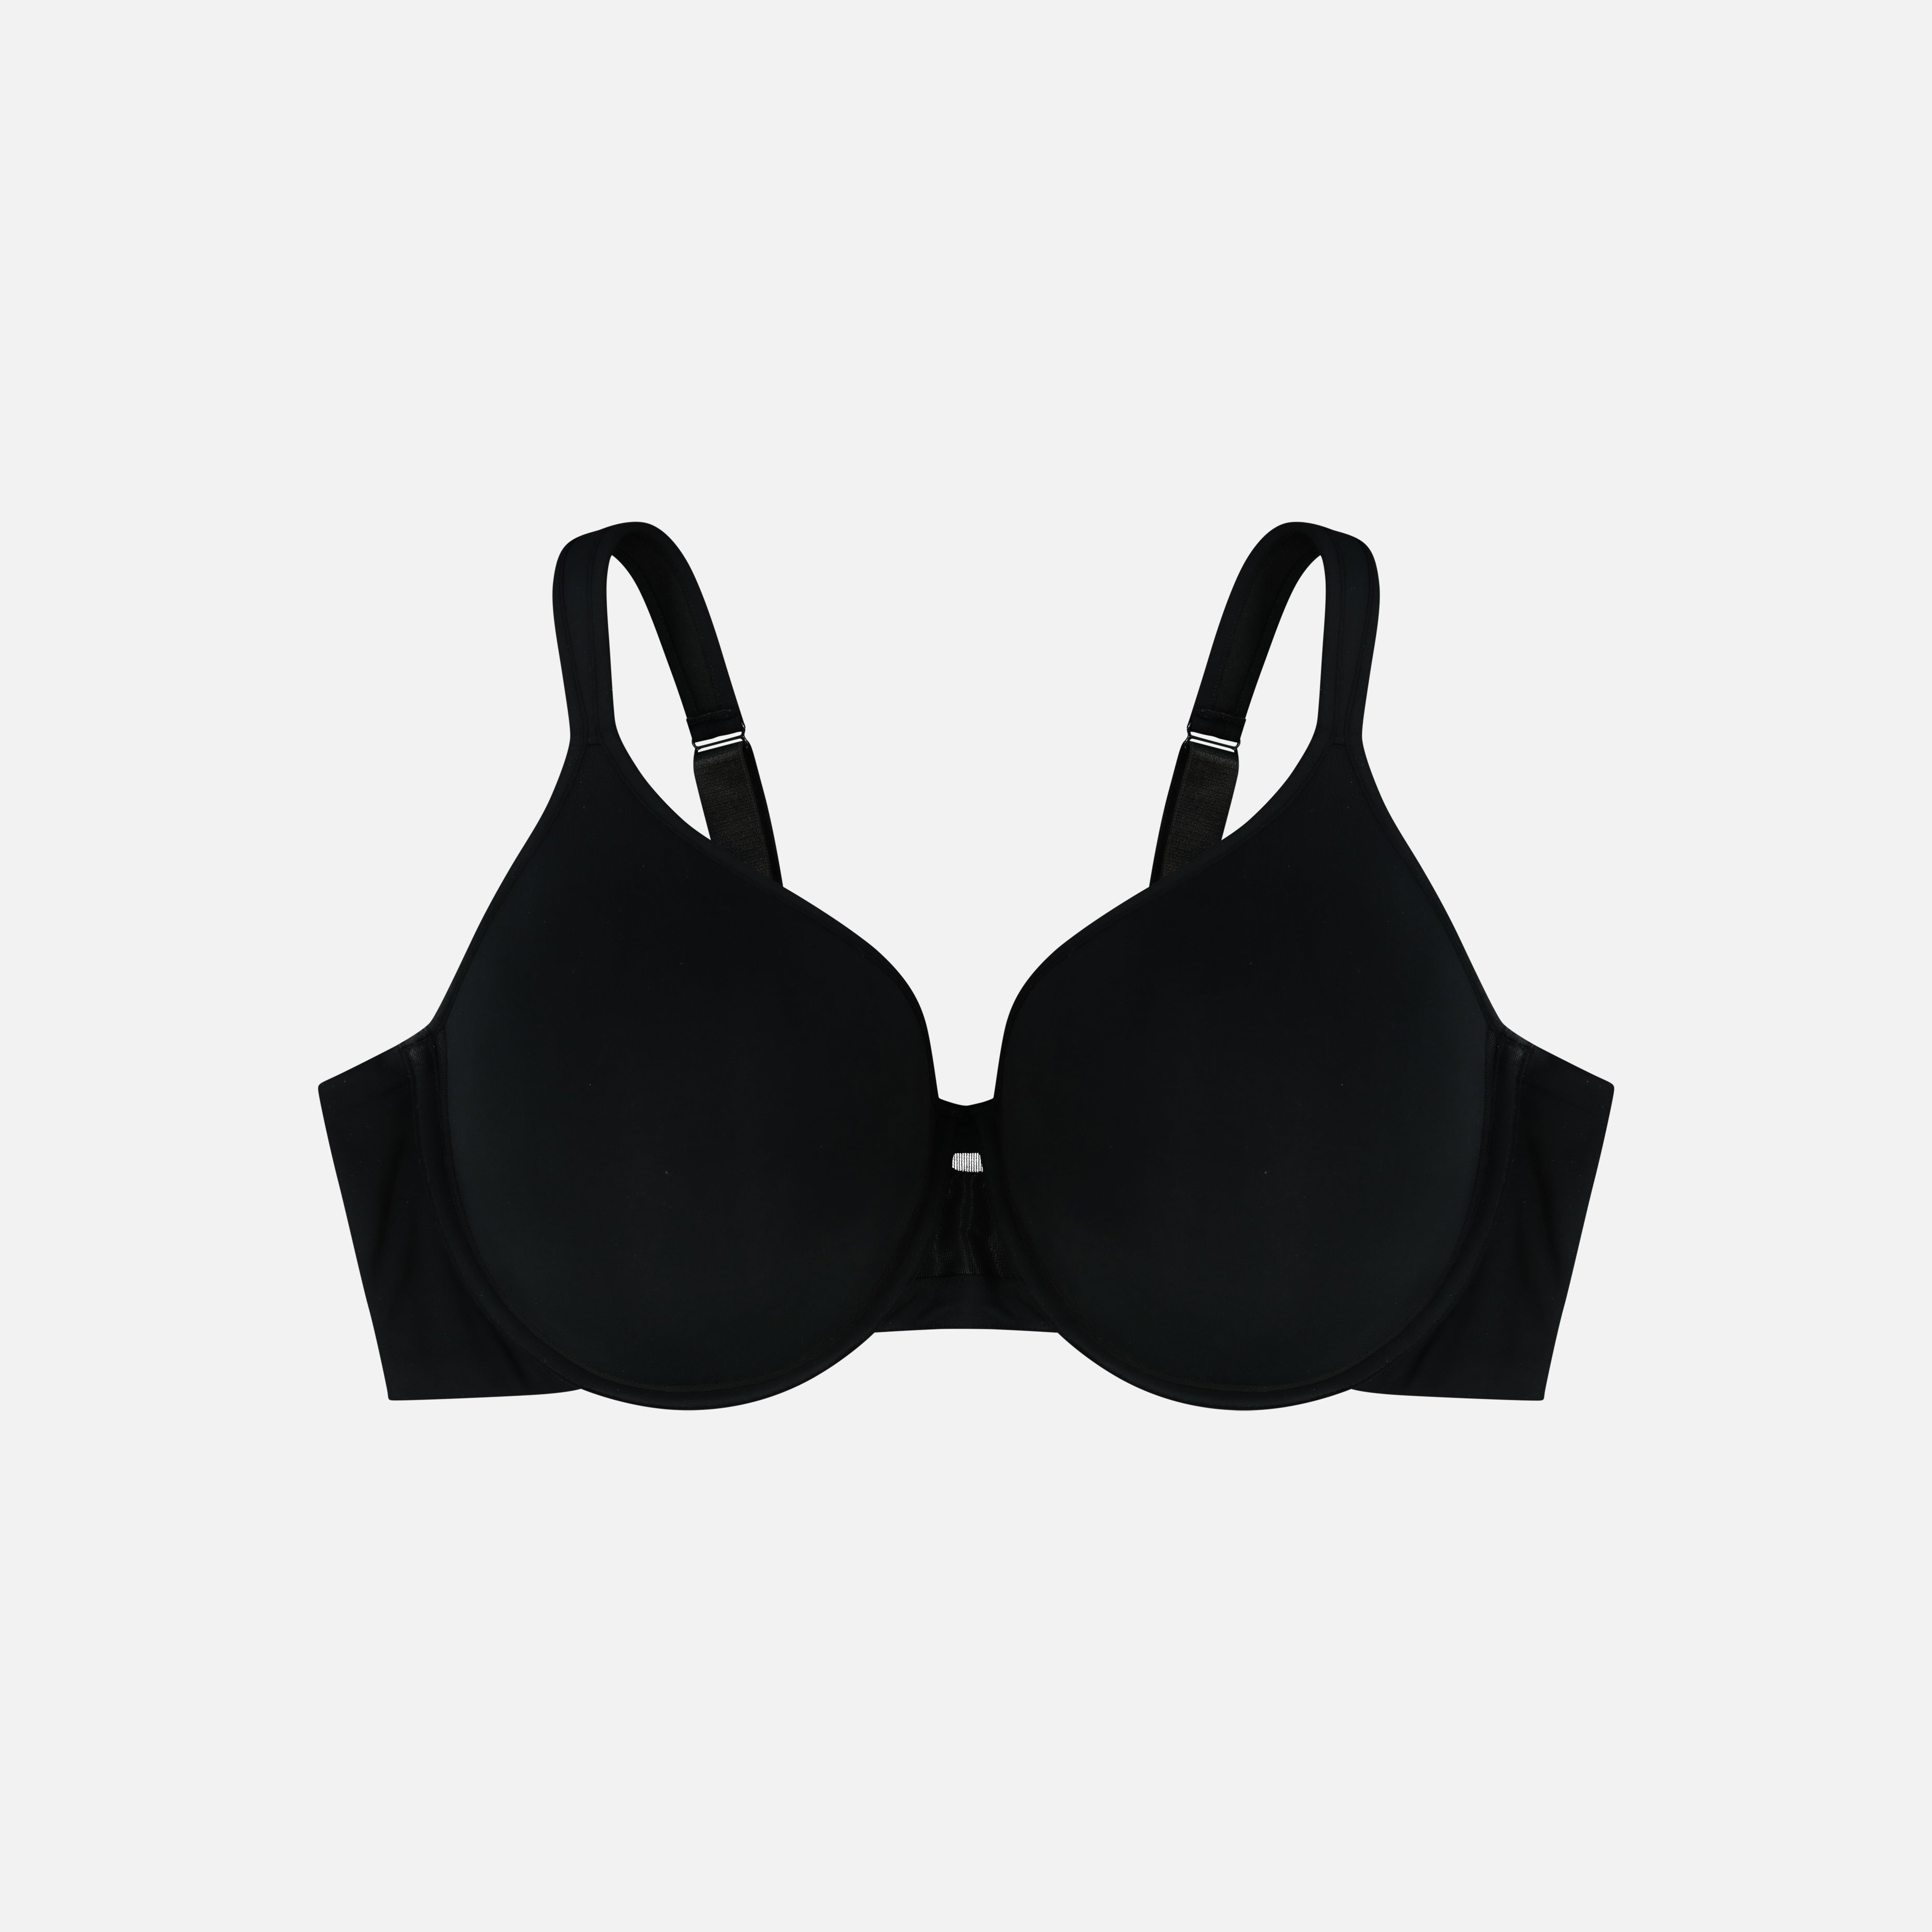 FULL COVERAGE B & C CUP BRA ✓Lightly Padded. ✓Has Underwire